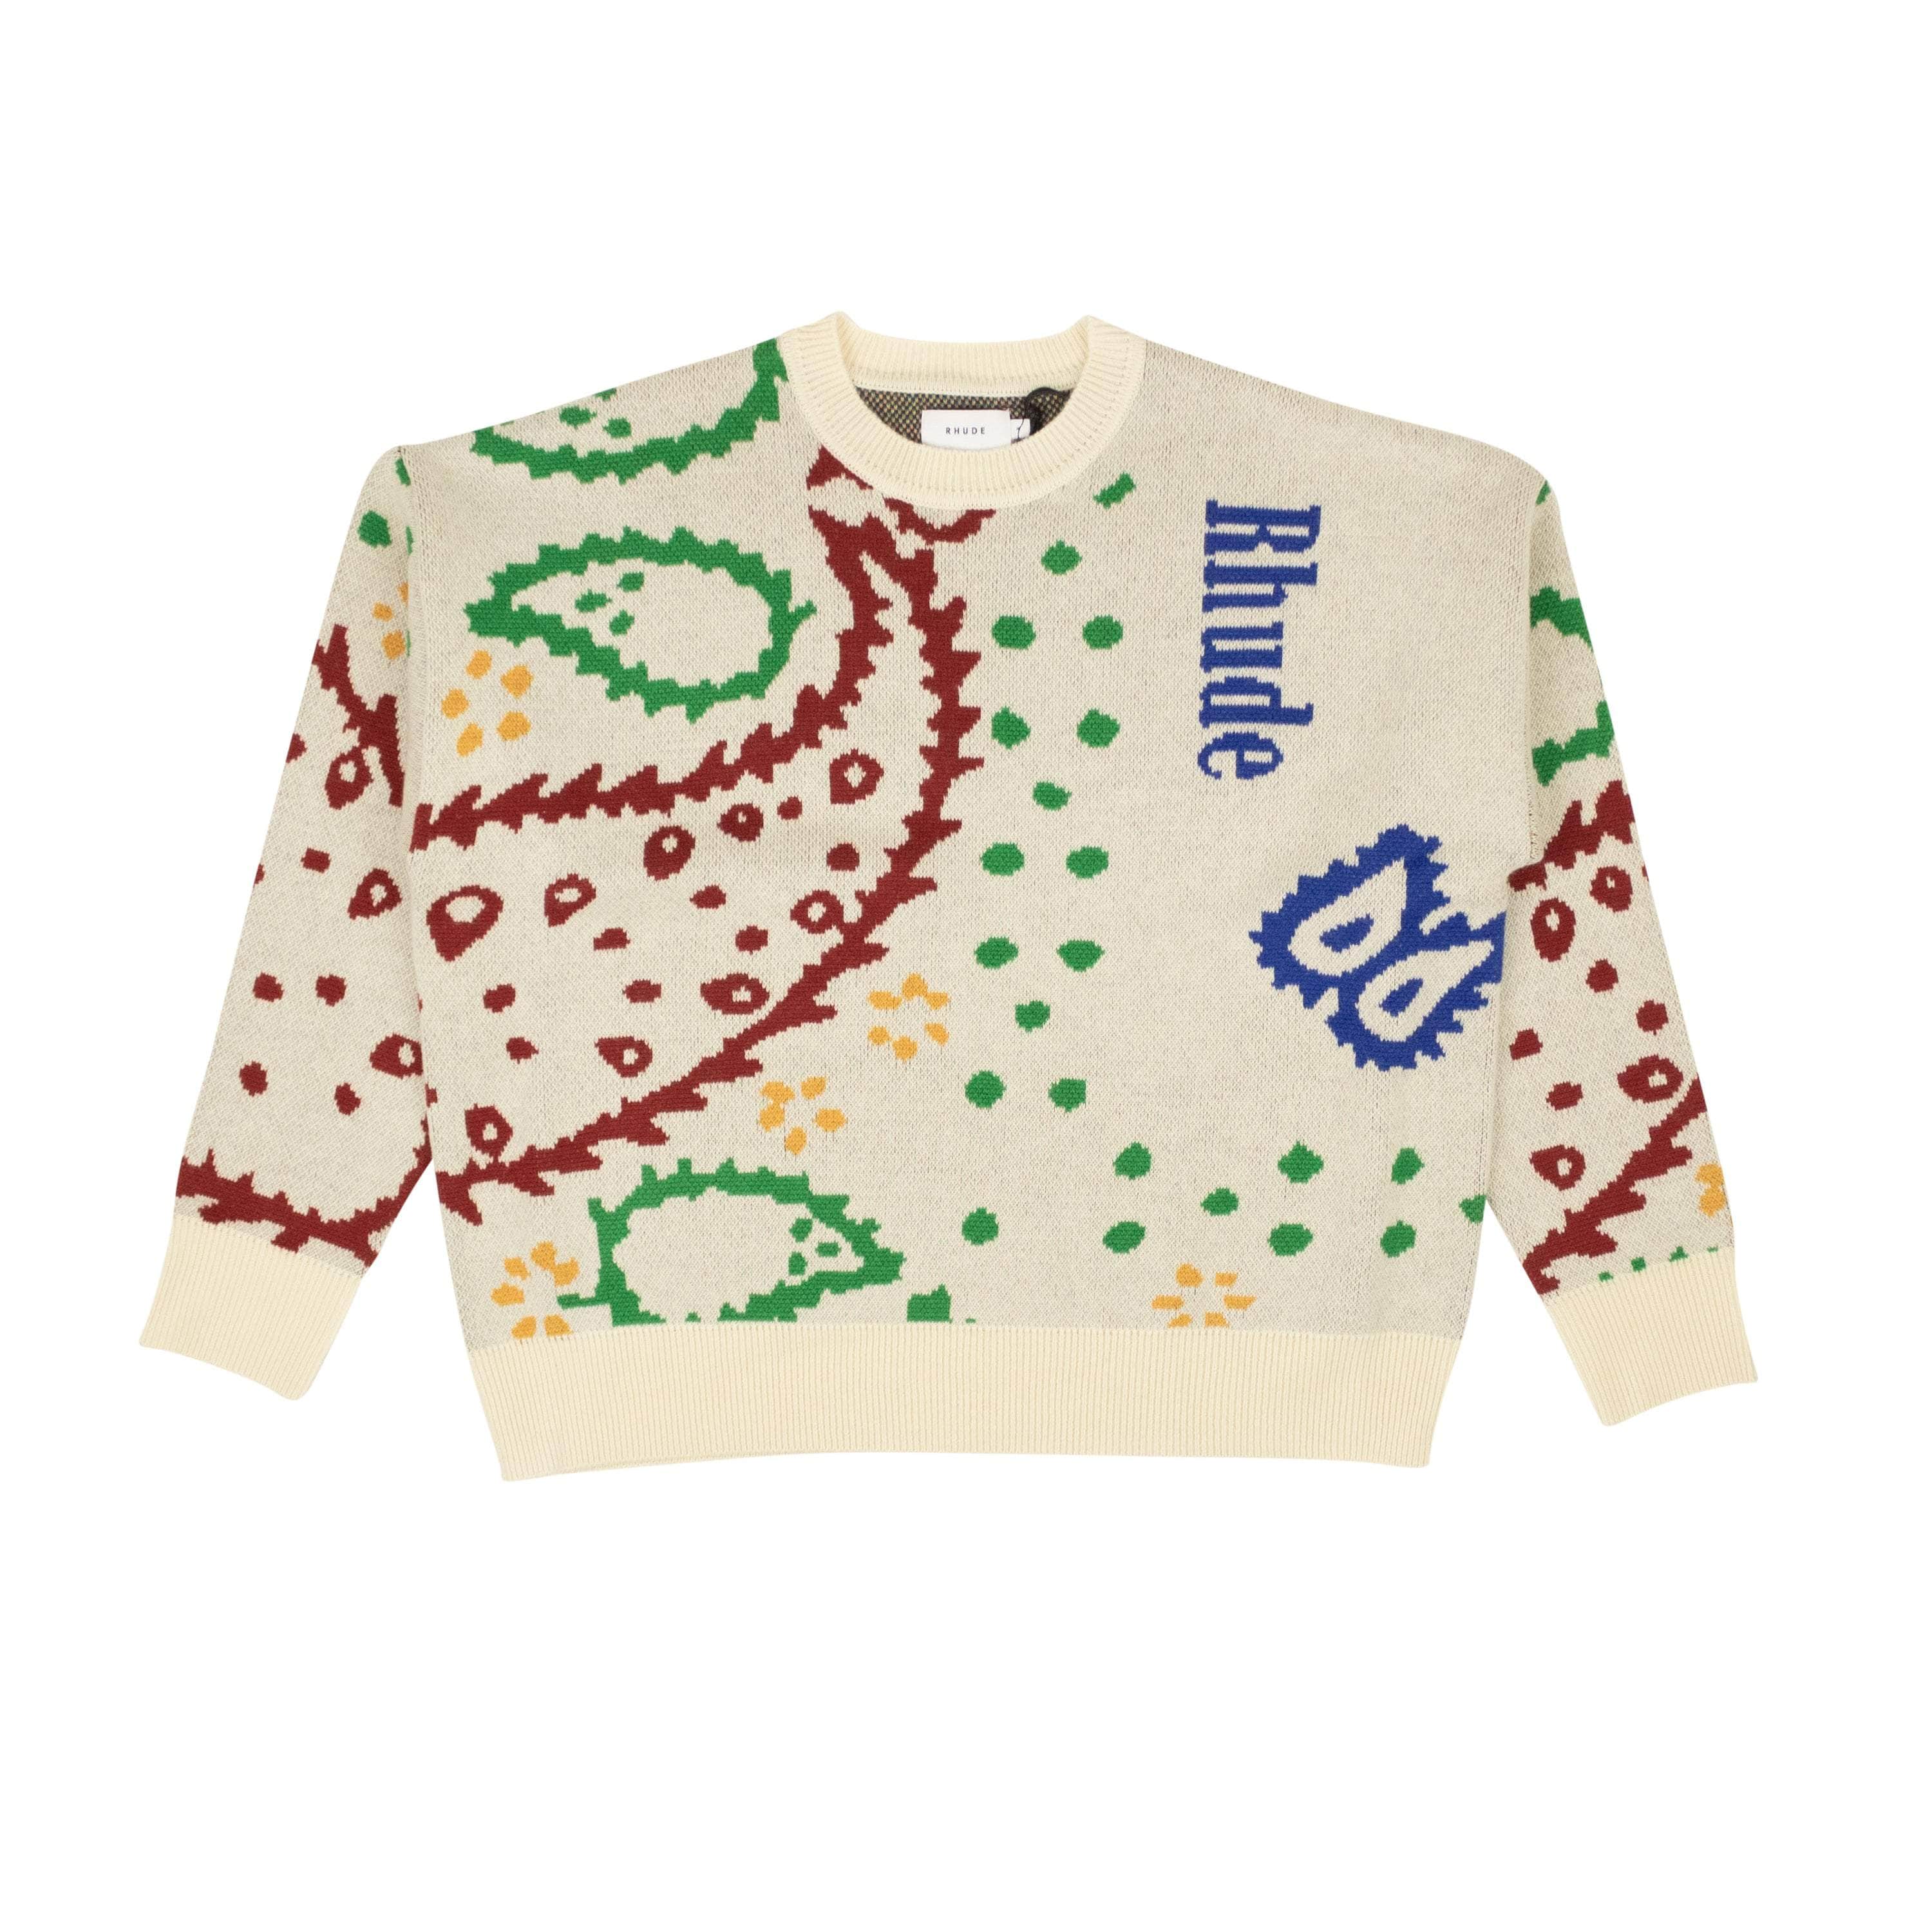 Rhude 750-1000, channelenable-all, chicmi, couponcollection, gender-mens, main-clothing, mens-pullover-sweaters, mens-shoes, rhude, size-m XL / RHD-XTPS-0025/XL Creme And Multicolored Merino Wool Bandana Crewneck RHD-XTPS-0025/XL RHD-XTPS-0025/XL